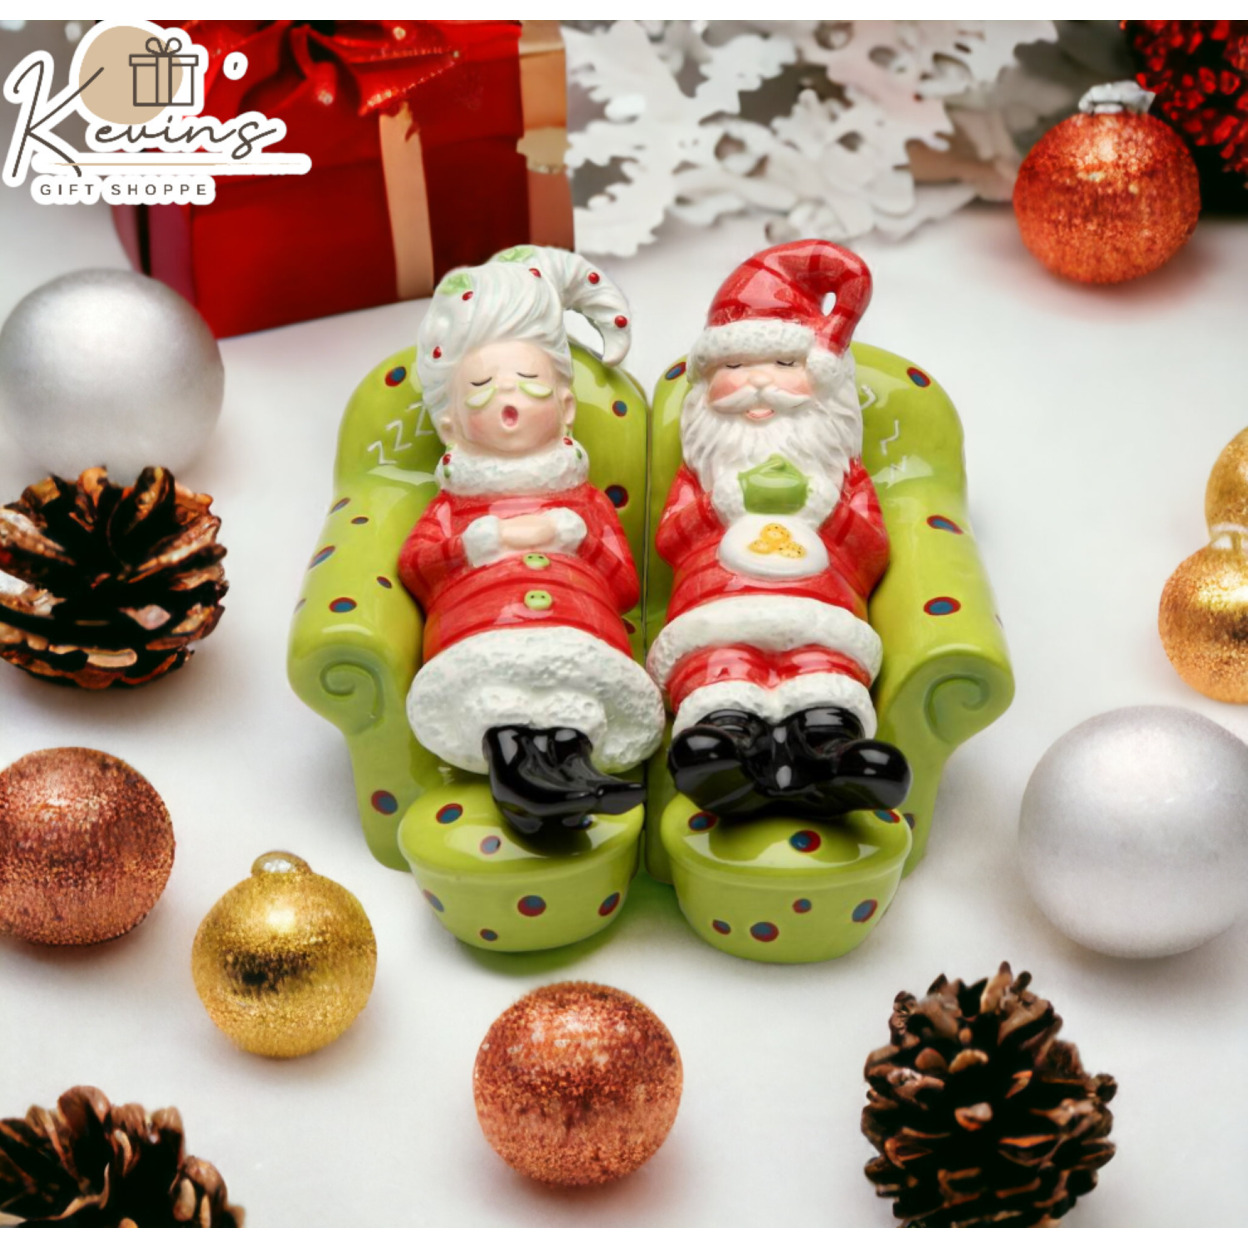 kevinsgiftshoppe Ceramic Christmas Decor Santa and Mrs. Claus Taking a Nap Salt and Pepper Shakers, Home Décor, Gift for Her, Gift for Mom,